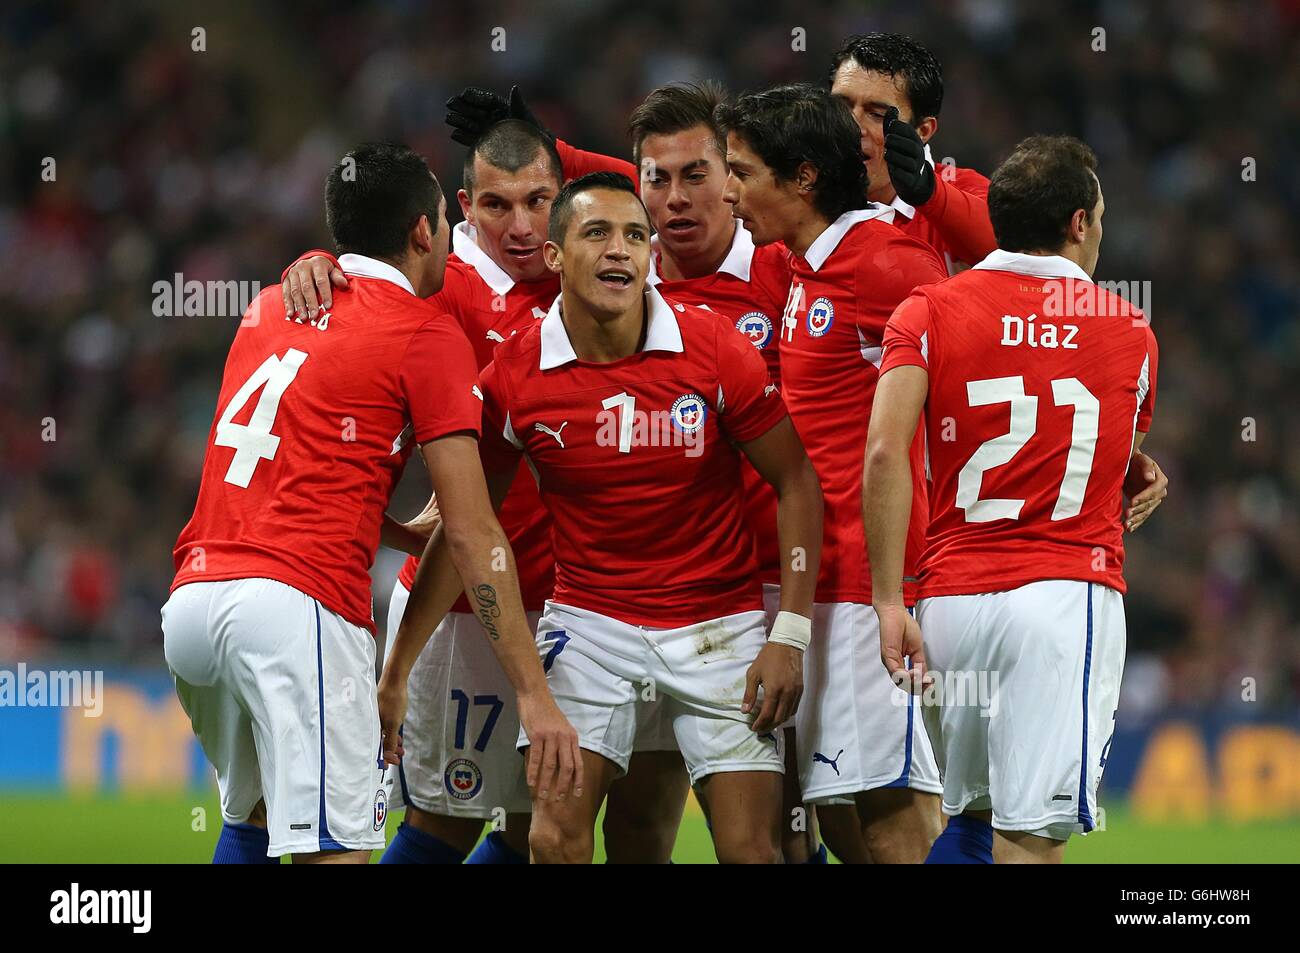 Soccer - International Friendly - England v Chile - Wembley Stadium. Chile's Sanchez Alexis celebrates scoring their first goal of the game with team-mates Stock Photo